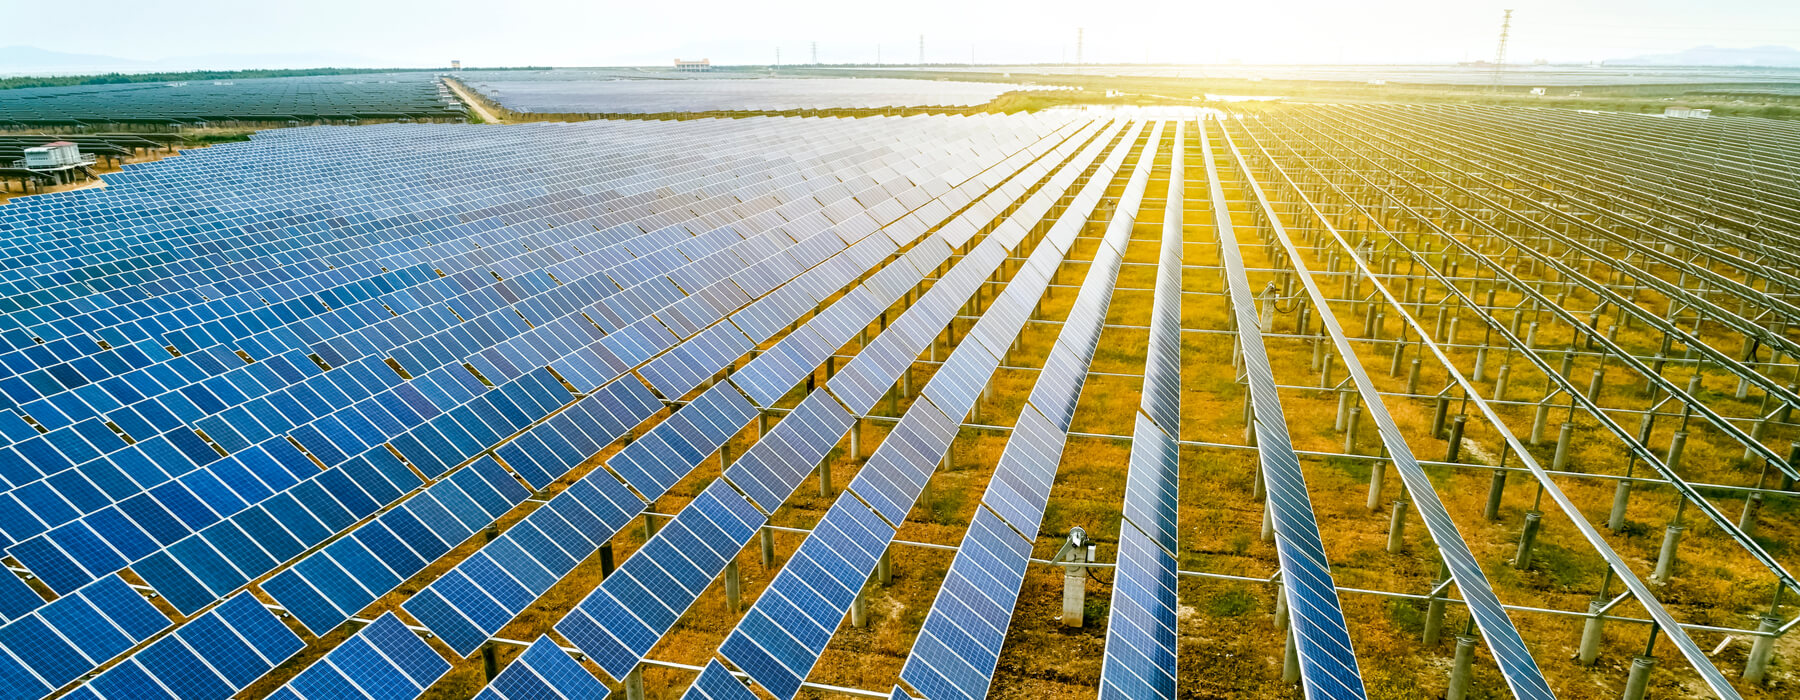 The US Solar Industry in 2022: Main Threats and Opportunities